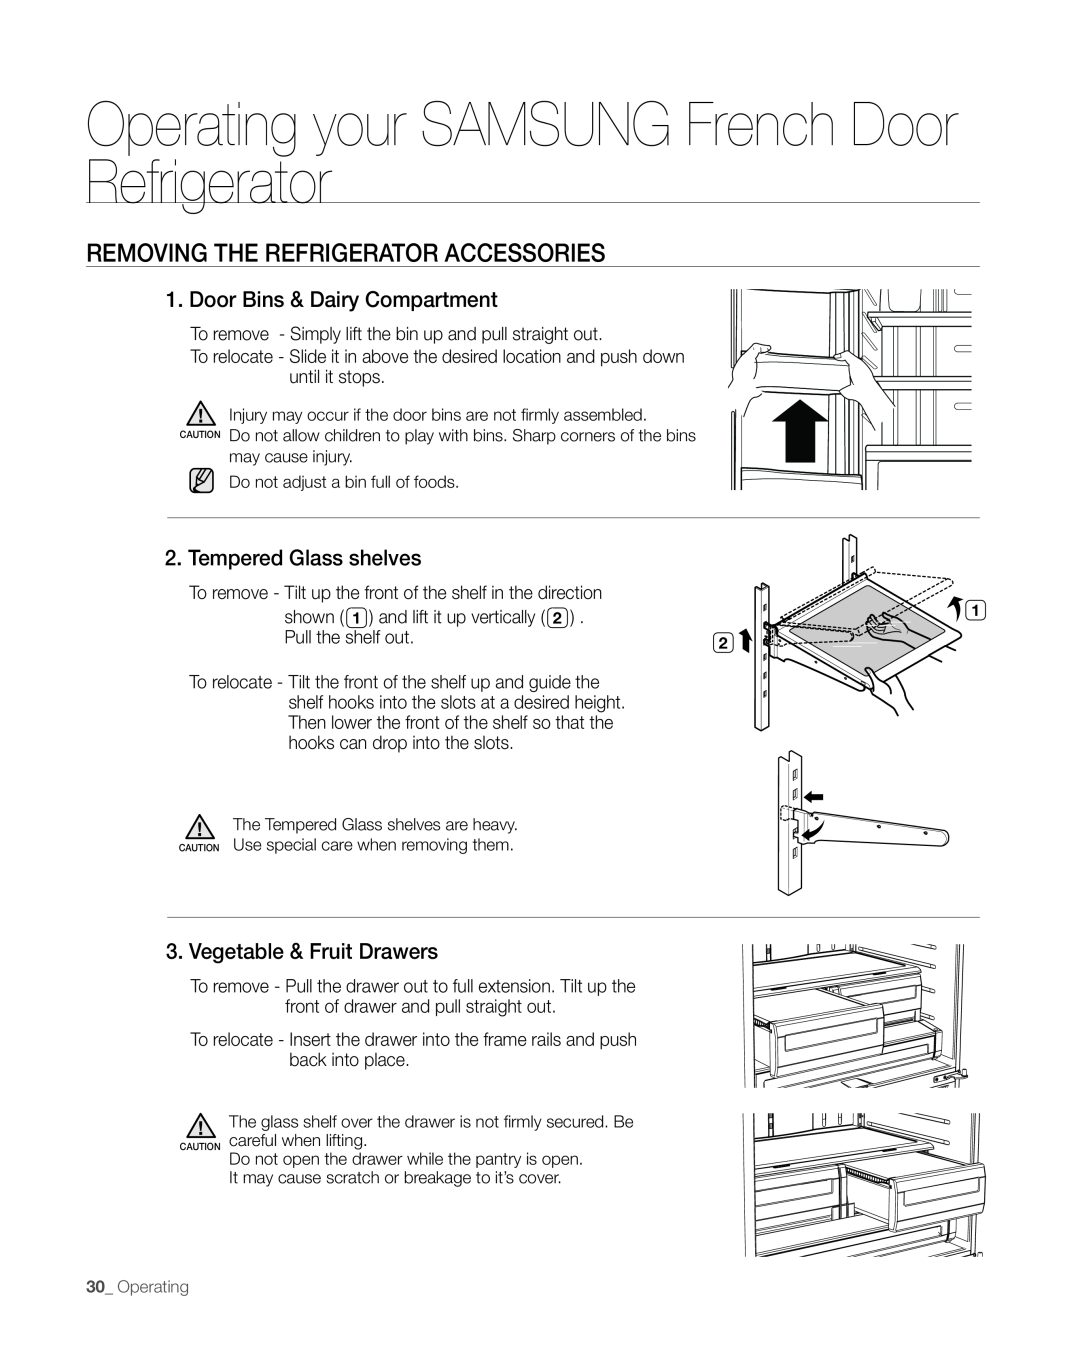 Sears RFG297AA manual Removing The Refrigerator Accessories, Door Bins & Dairy Compartment, Tempered Glass shelves 